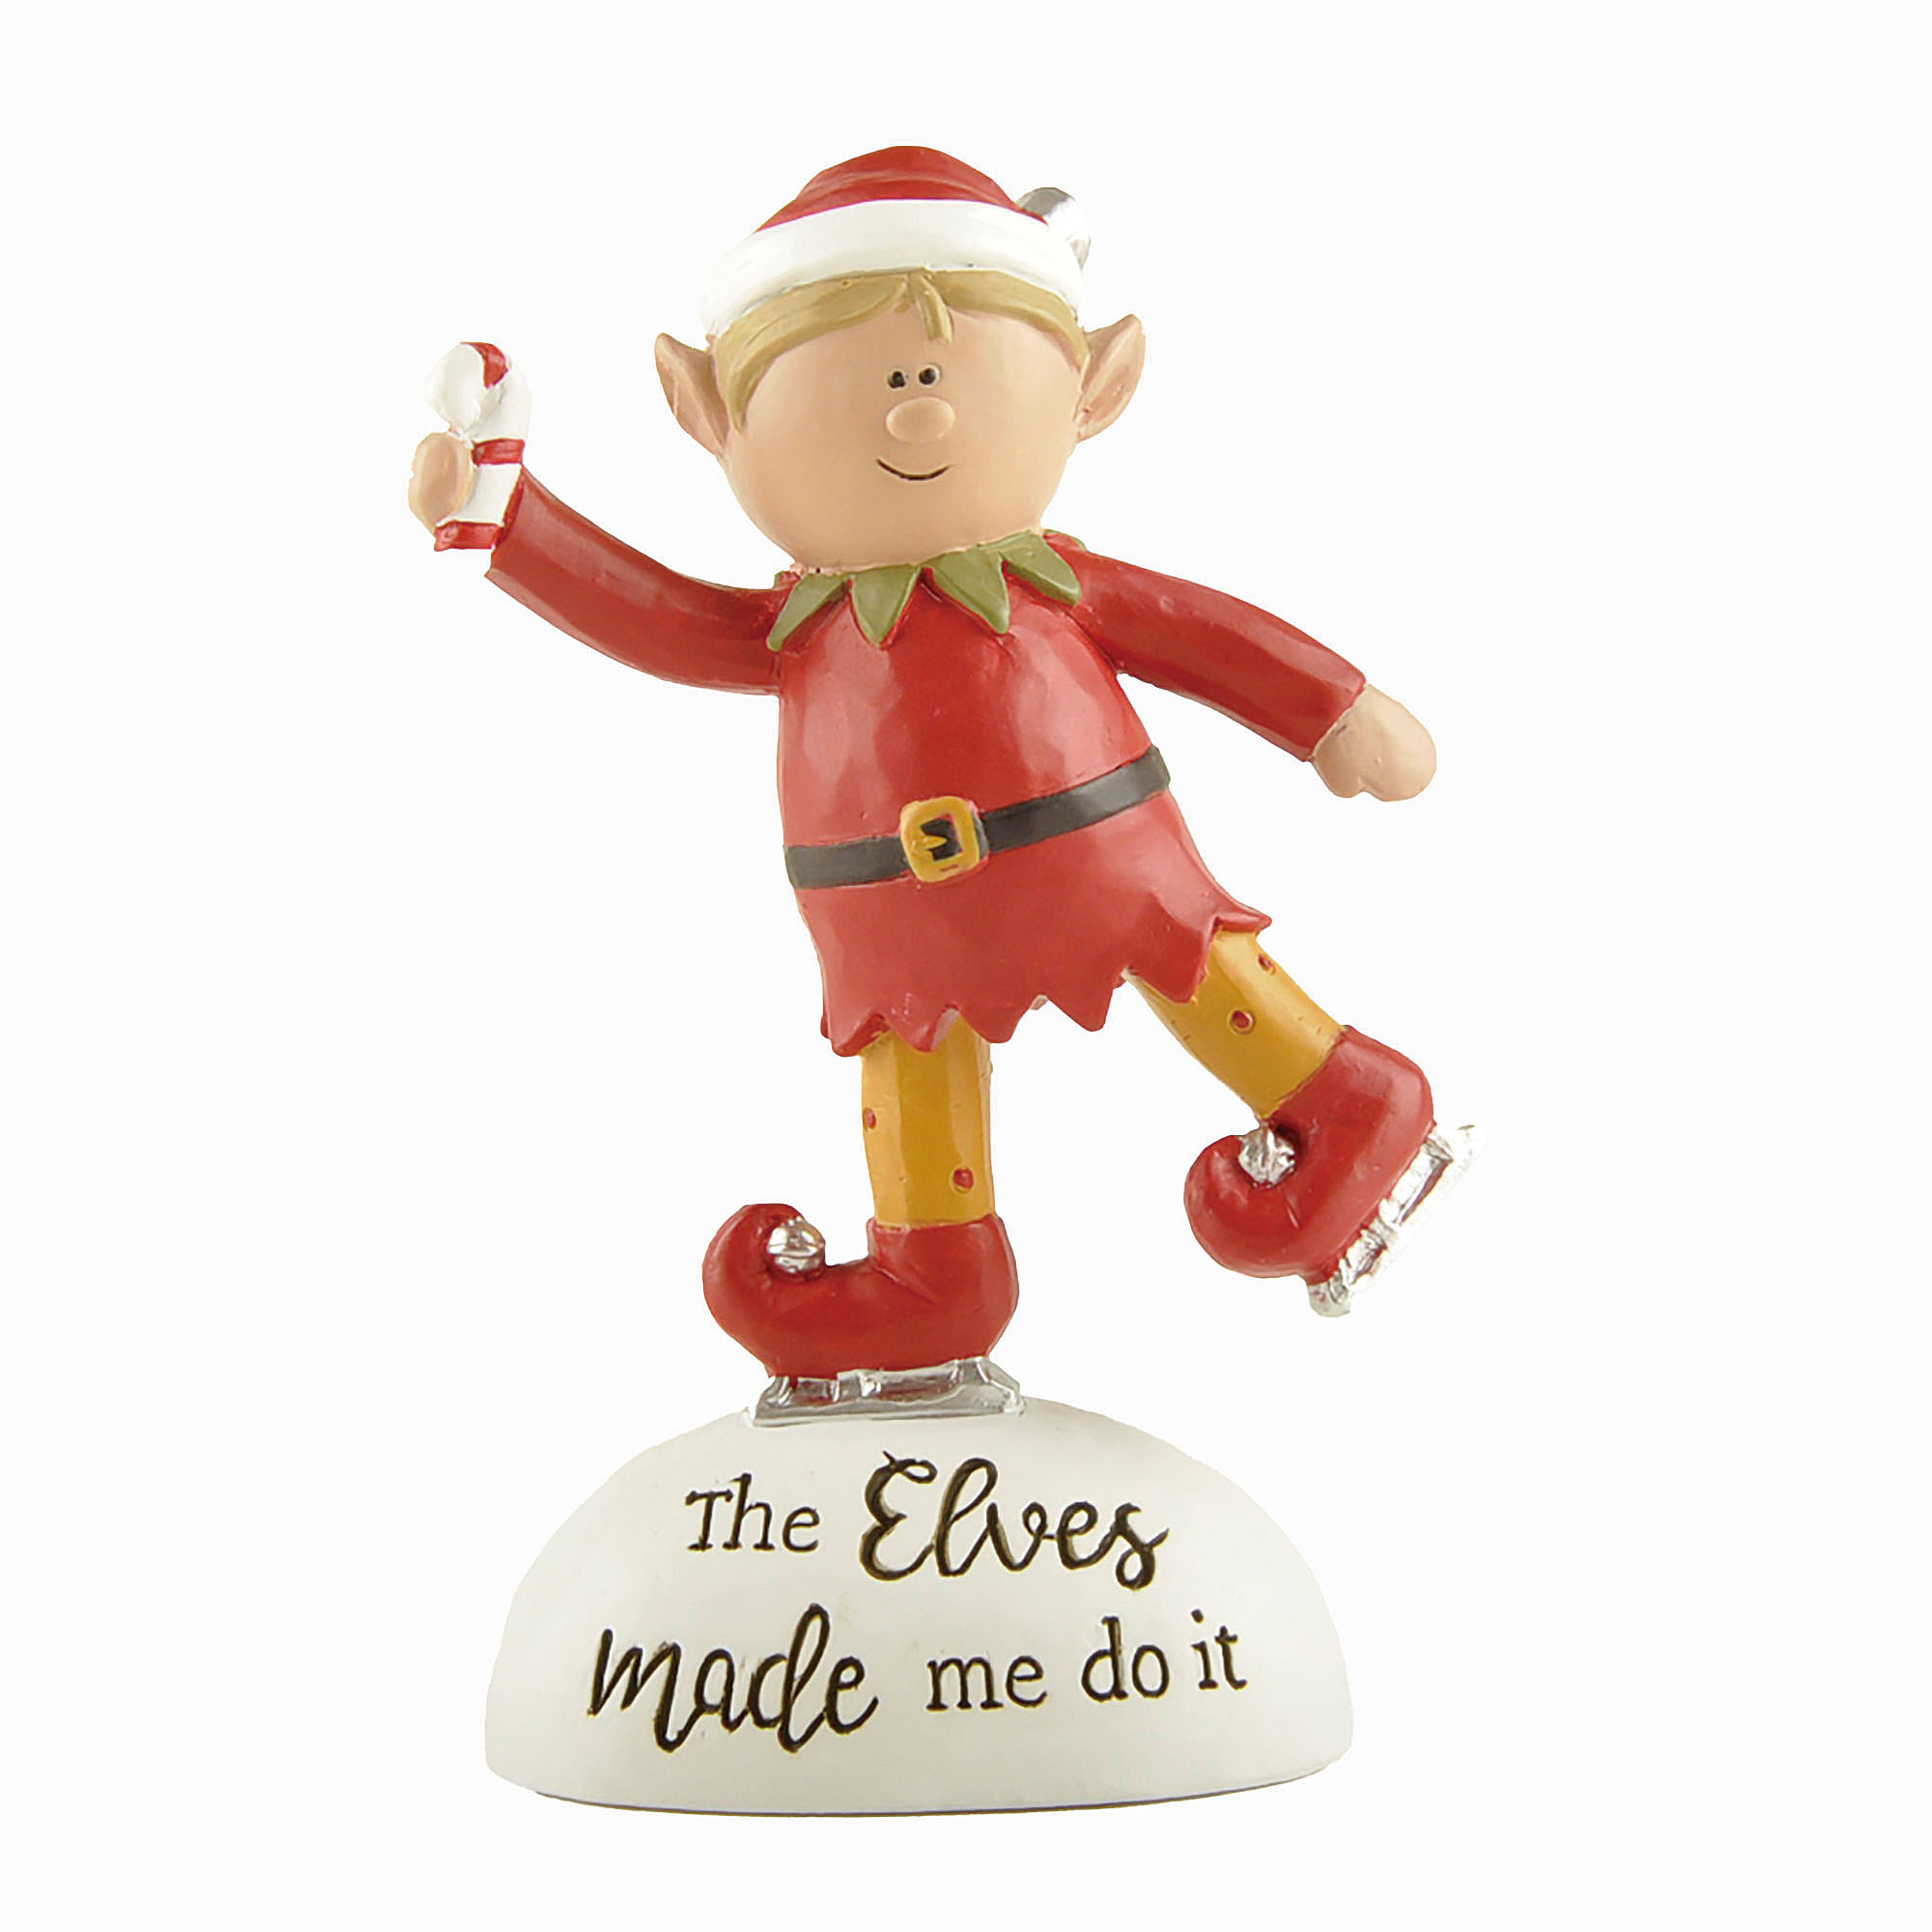 Mischievous Resin Elf Figurine 'The Elves Made Me Do It' Whimsical Christmas Decoration for Holiday Fun 238-13908